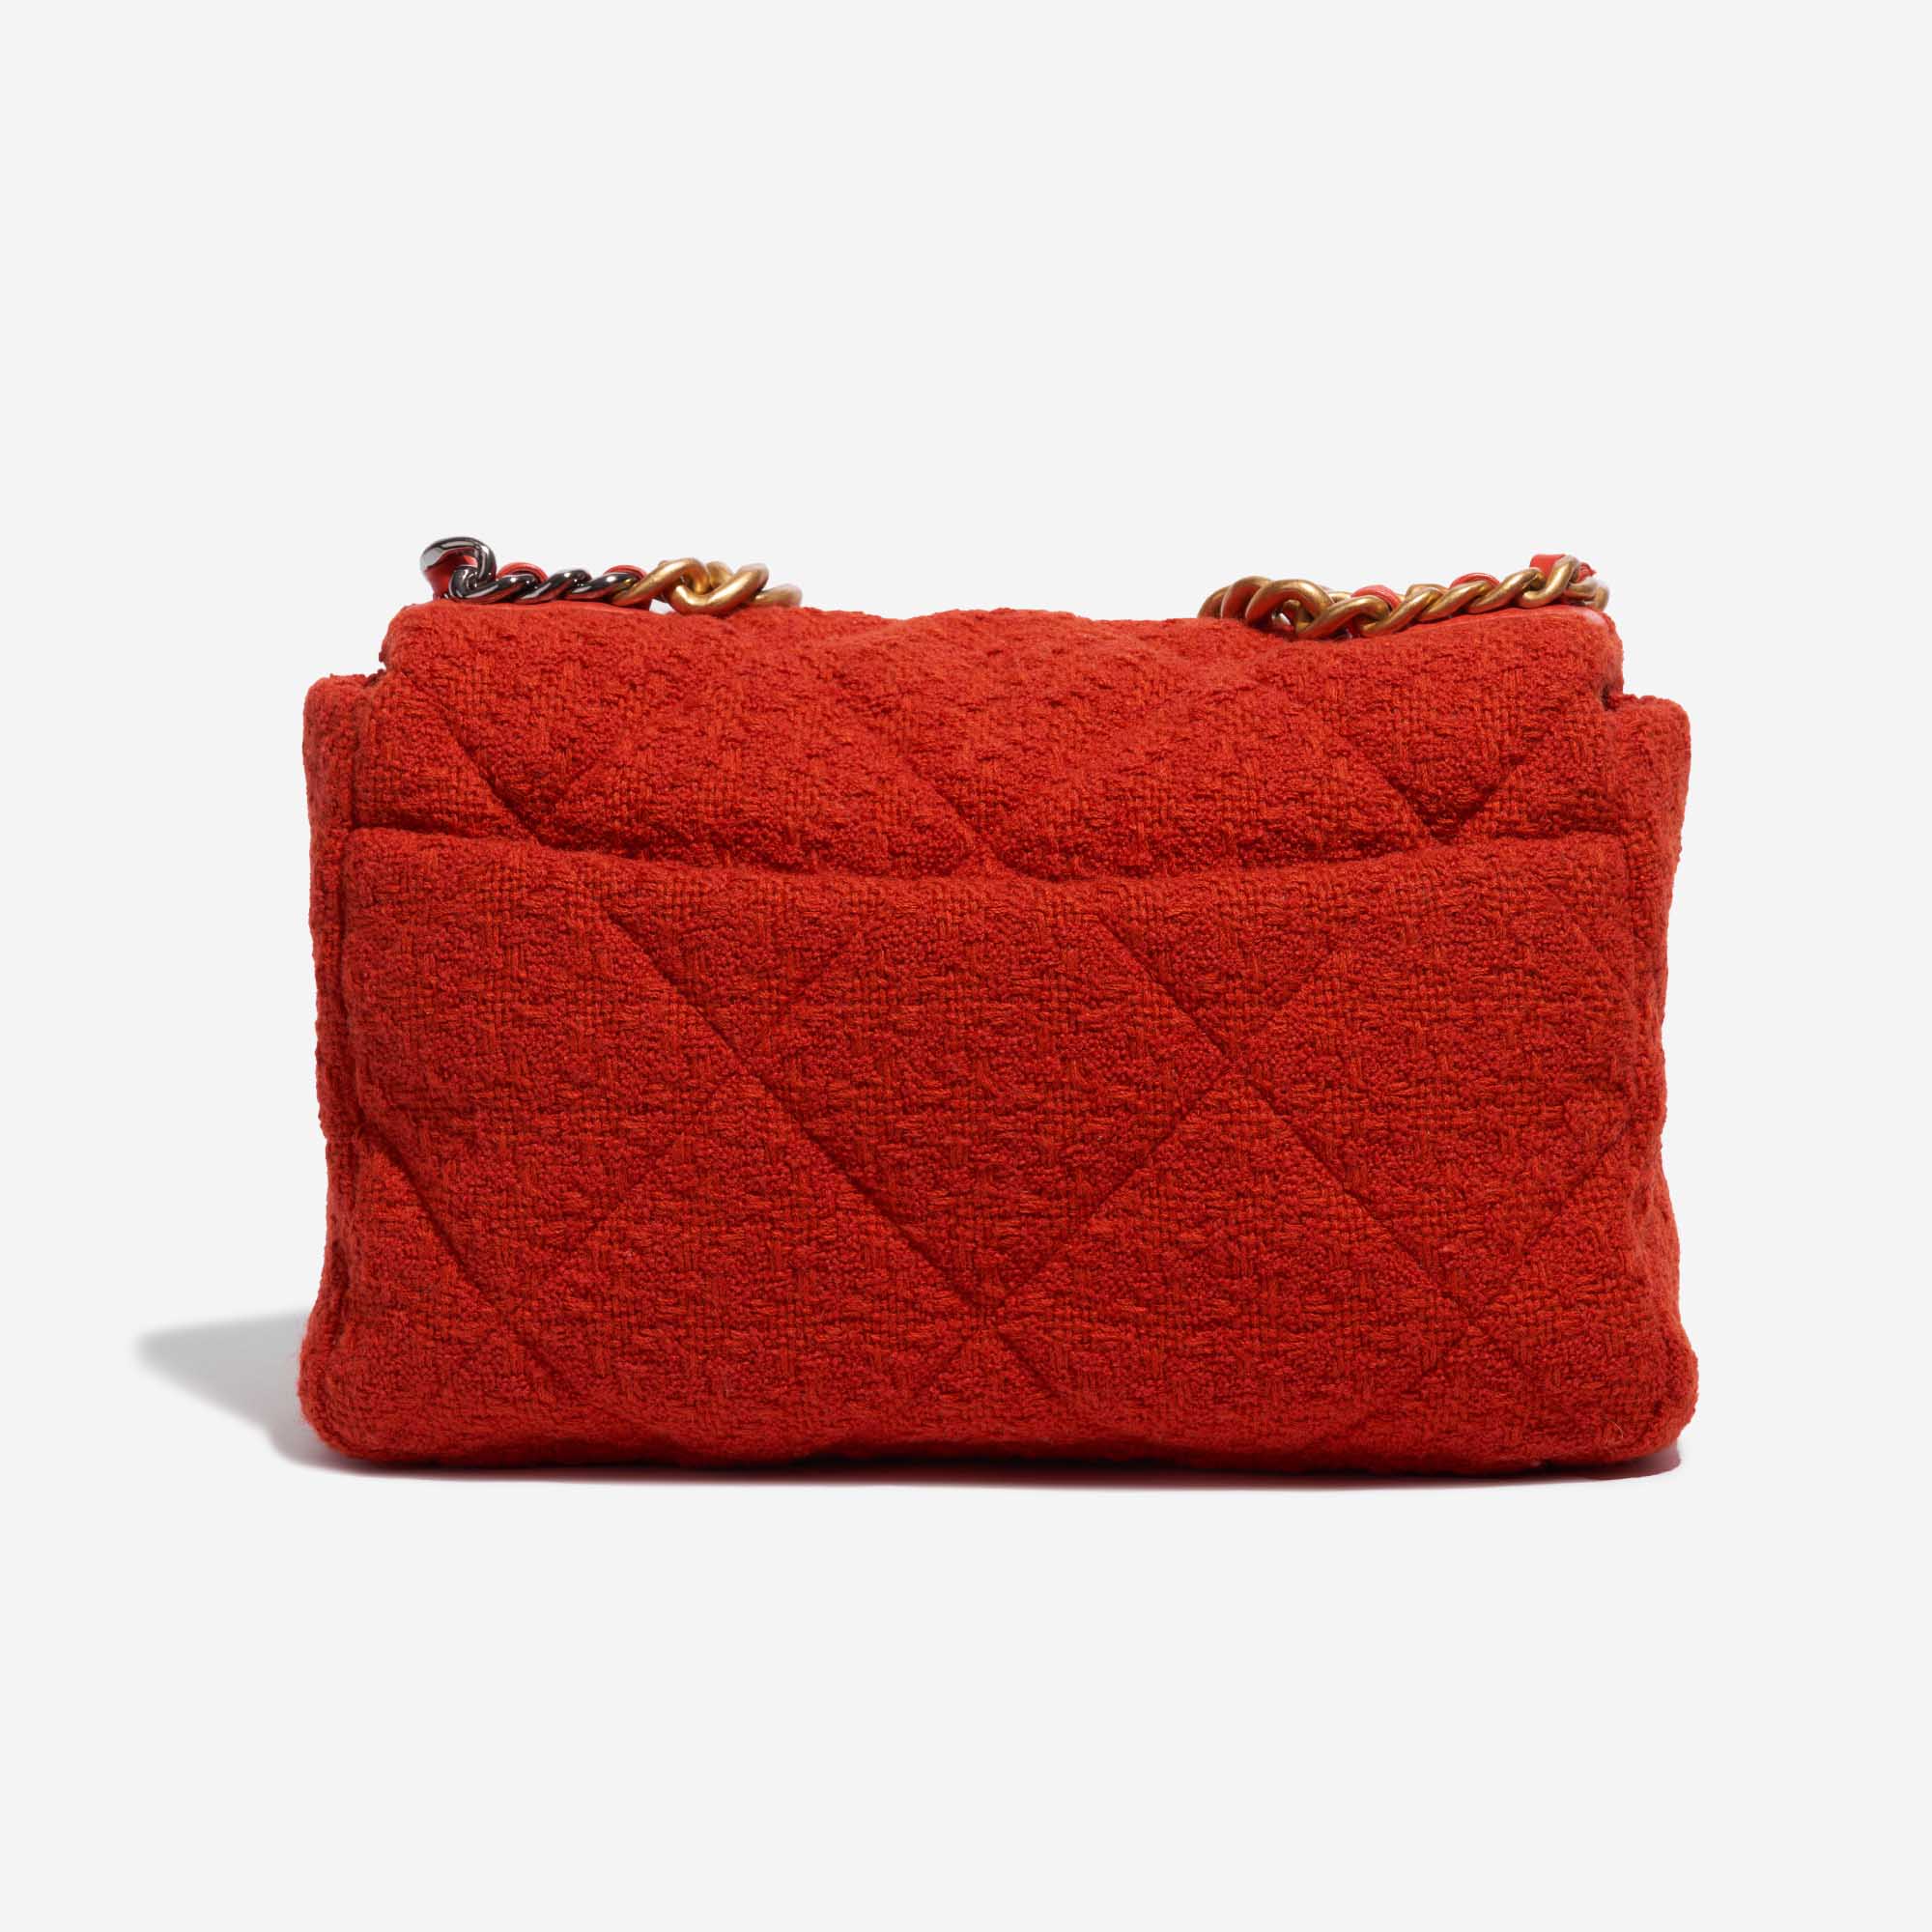 Pre-owned Chanel bag 19 Flap Bag Large Wool Red Red Back | Sell your designer bag on Saclab.com